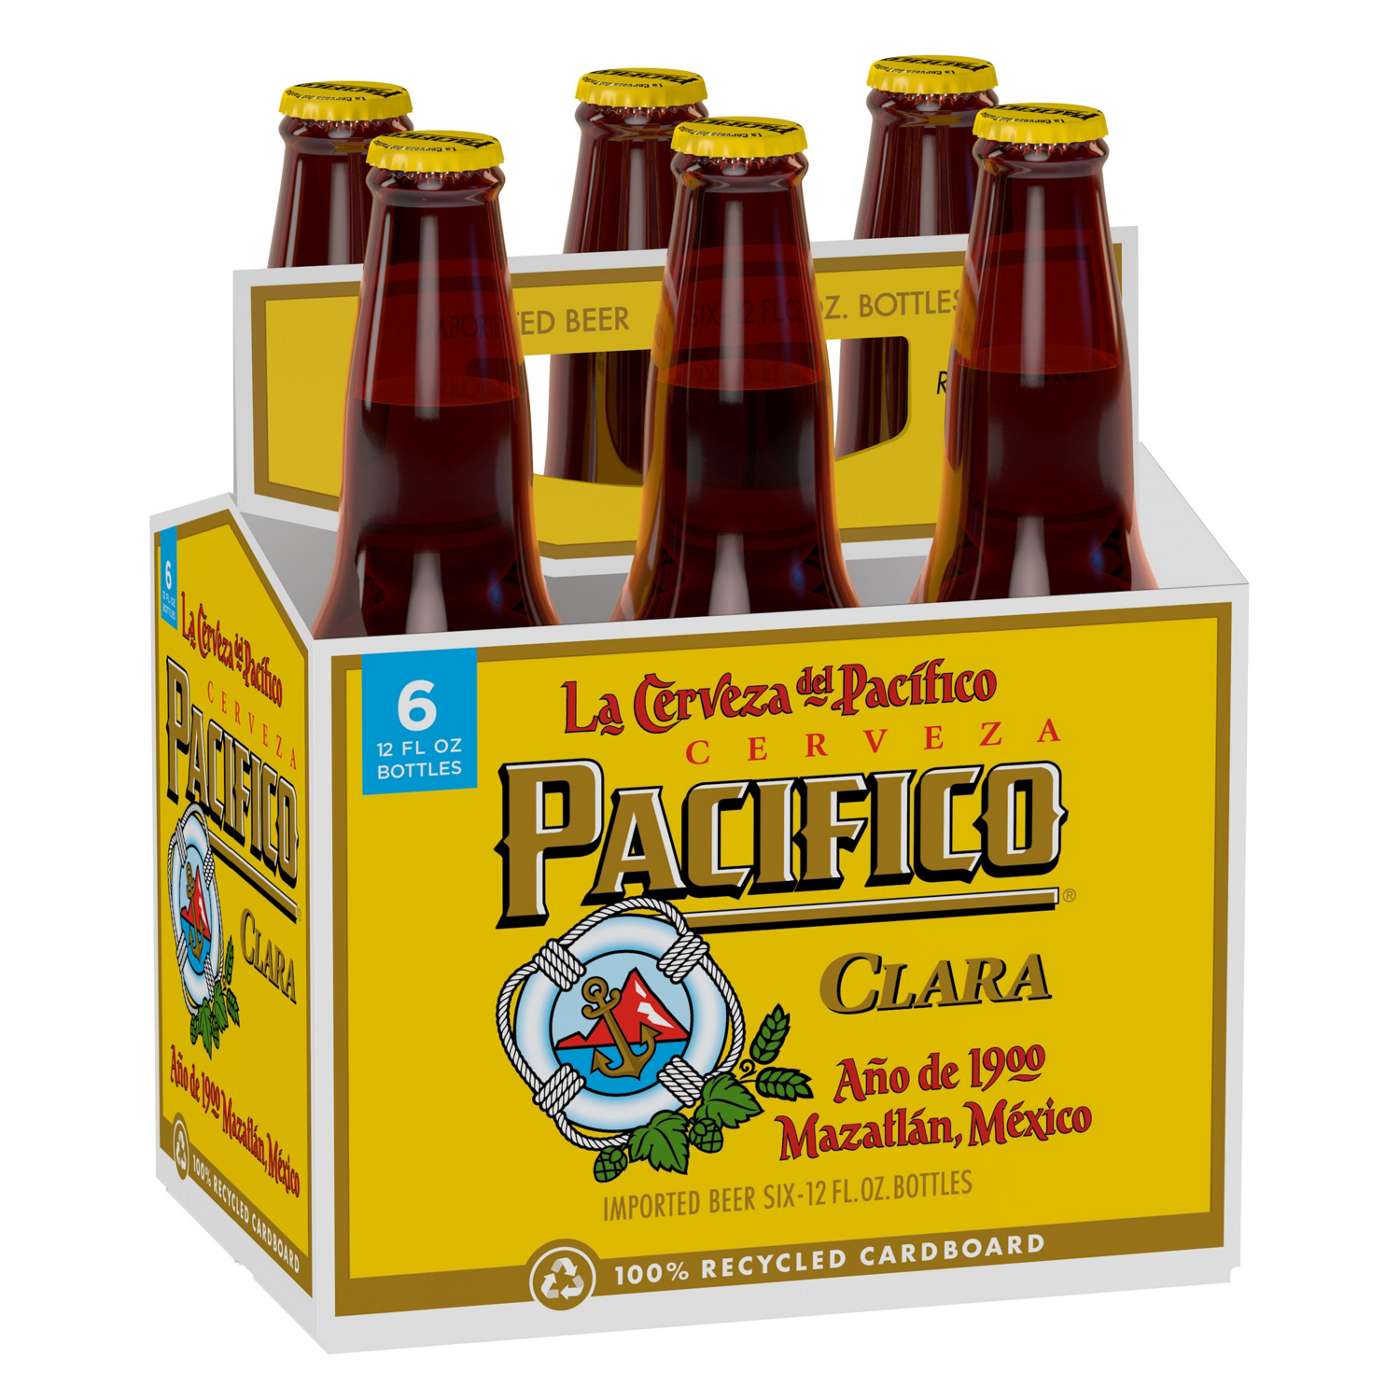 Pacifico Clara Mexican Lager Import Beer 12 oz Bottles, 6 pk; image 1 of 10